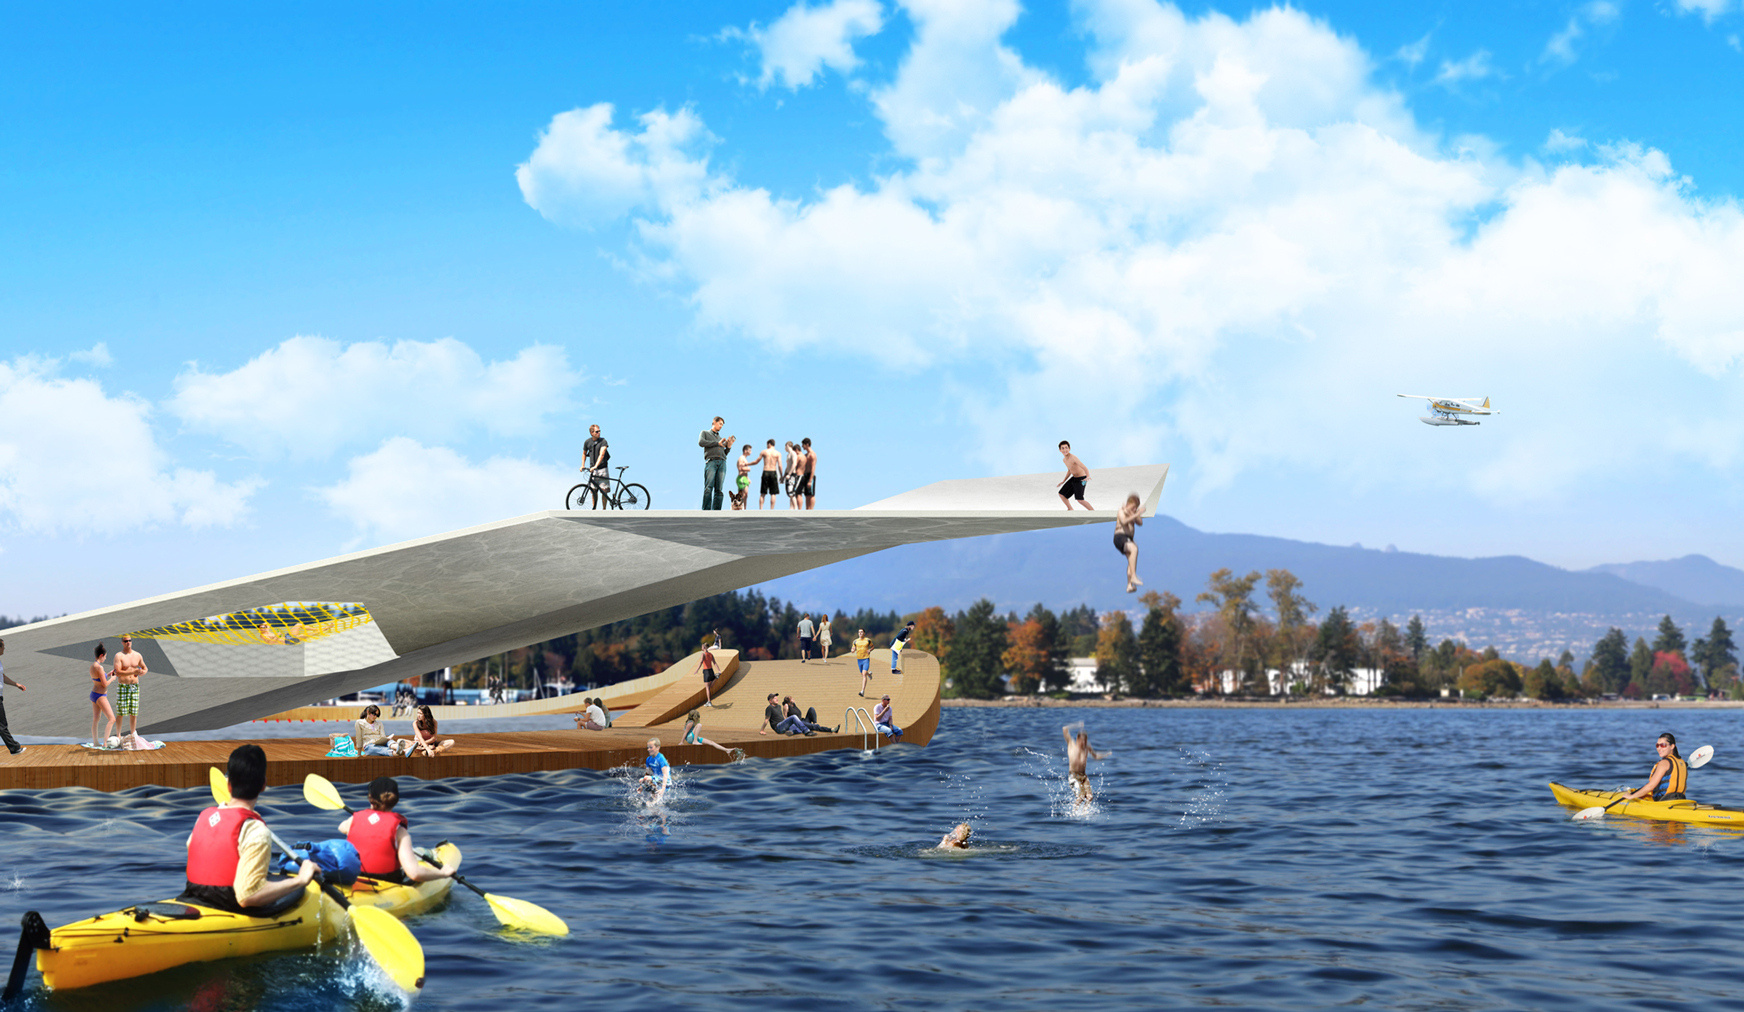 Rendering of on-water and off-water activities that can be enjoyed.